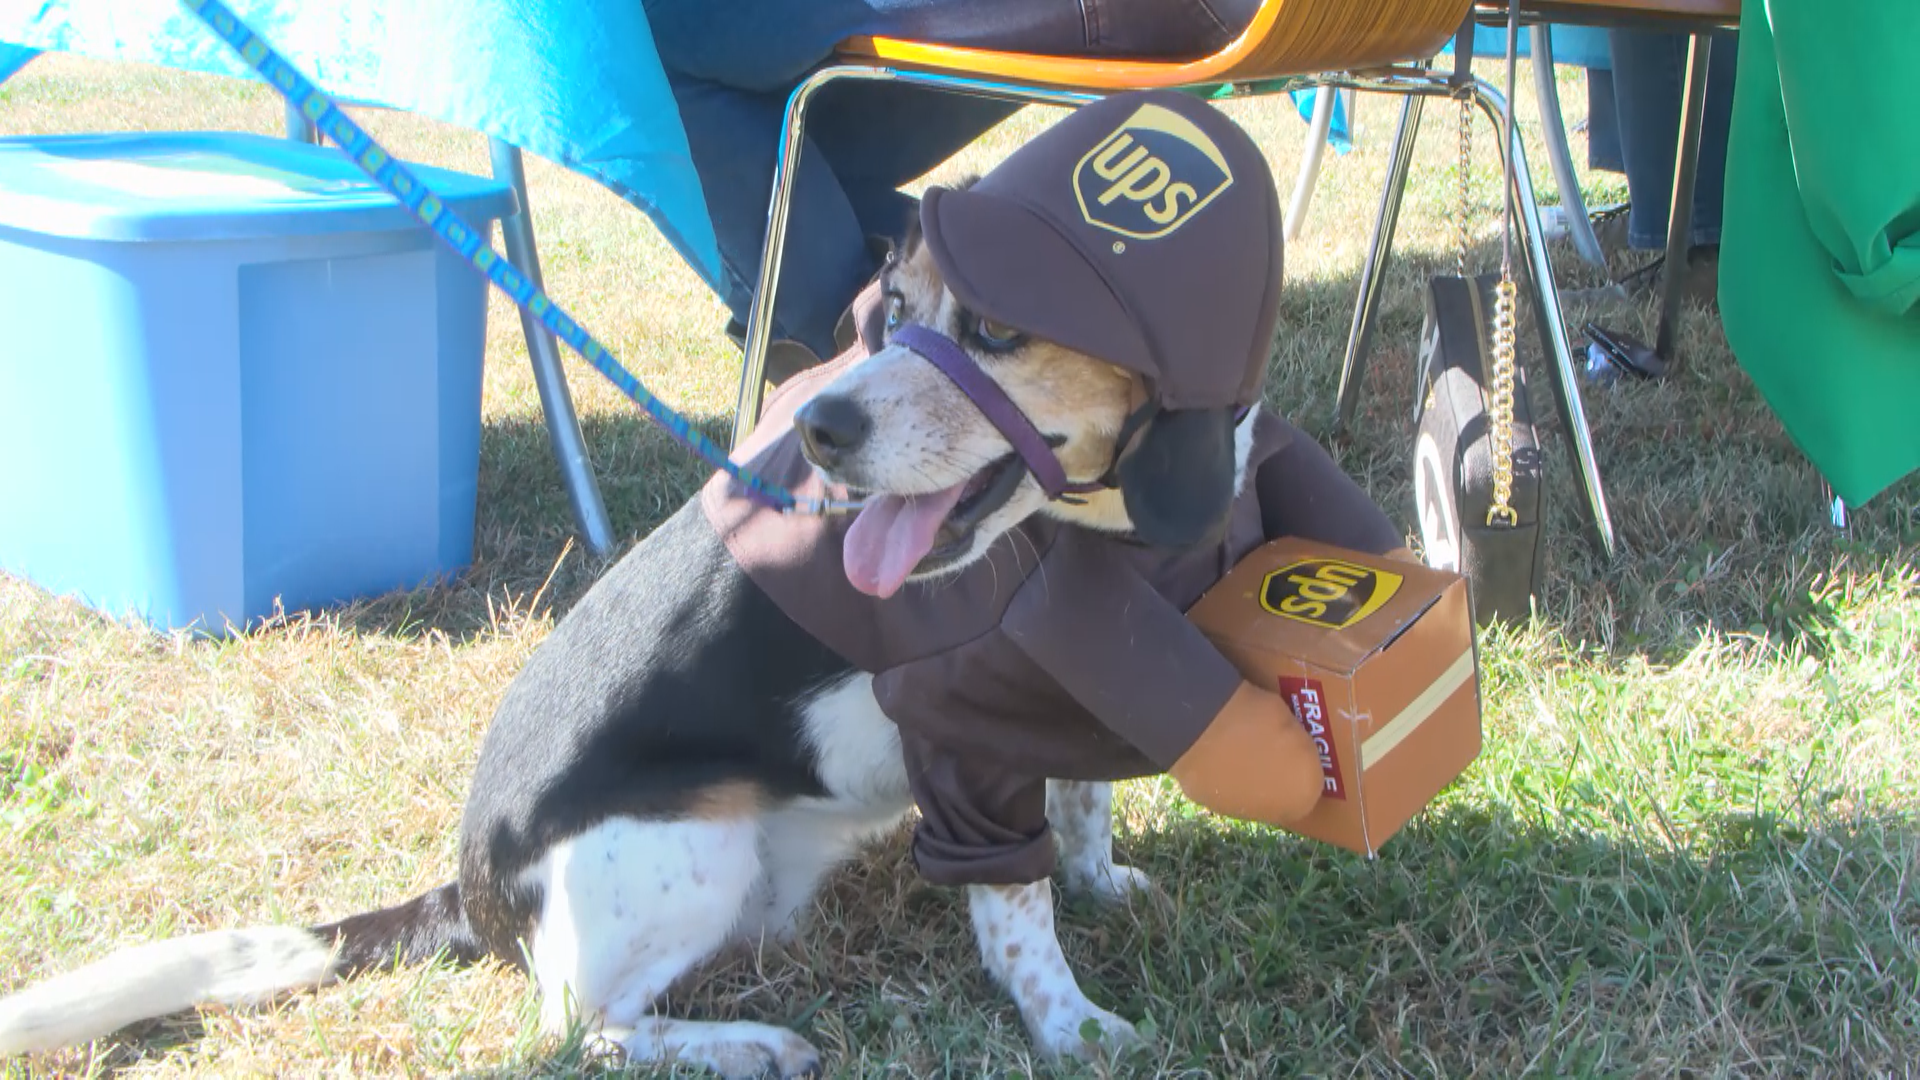 Mutts strut their stuff at second annual dog costume contest in Florham Park, Florham Park Eagle News